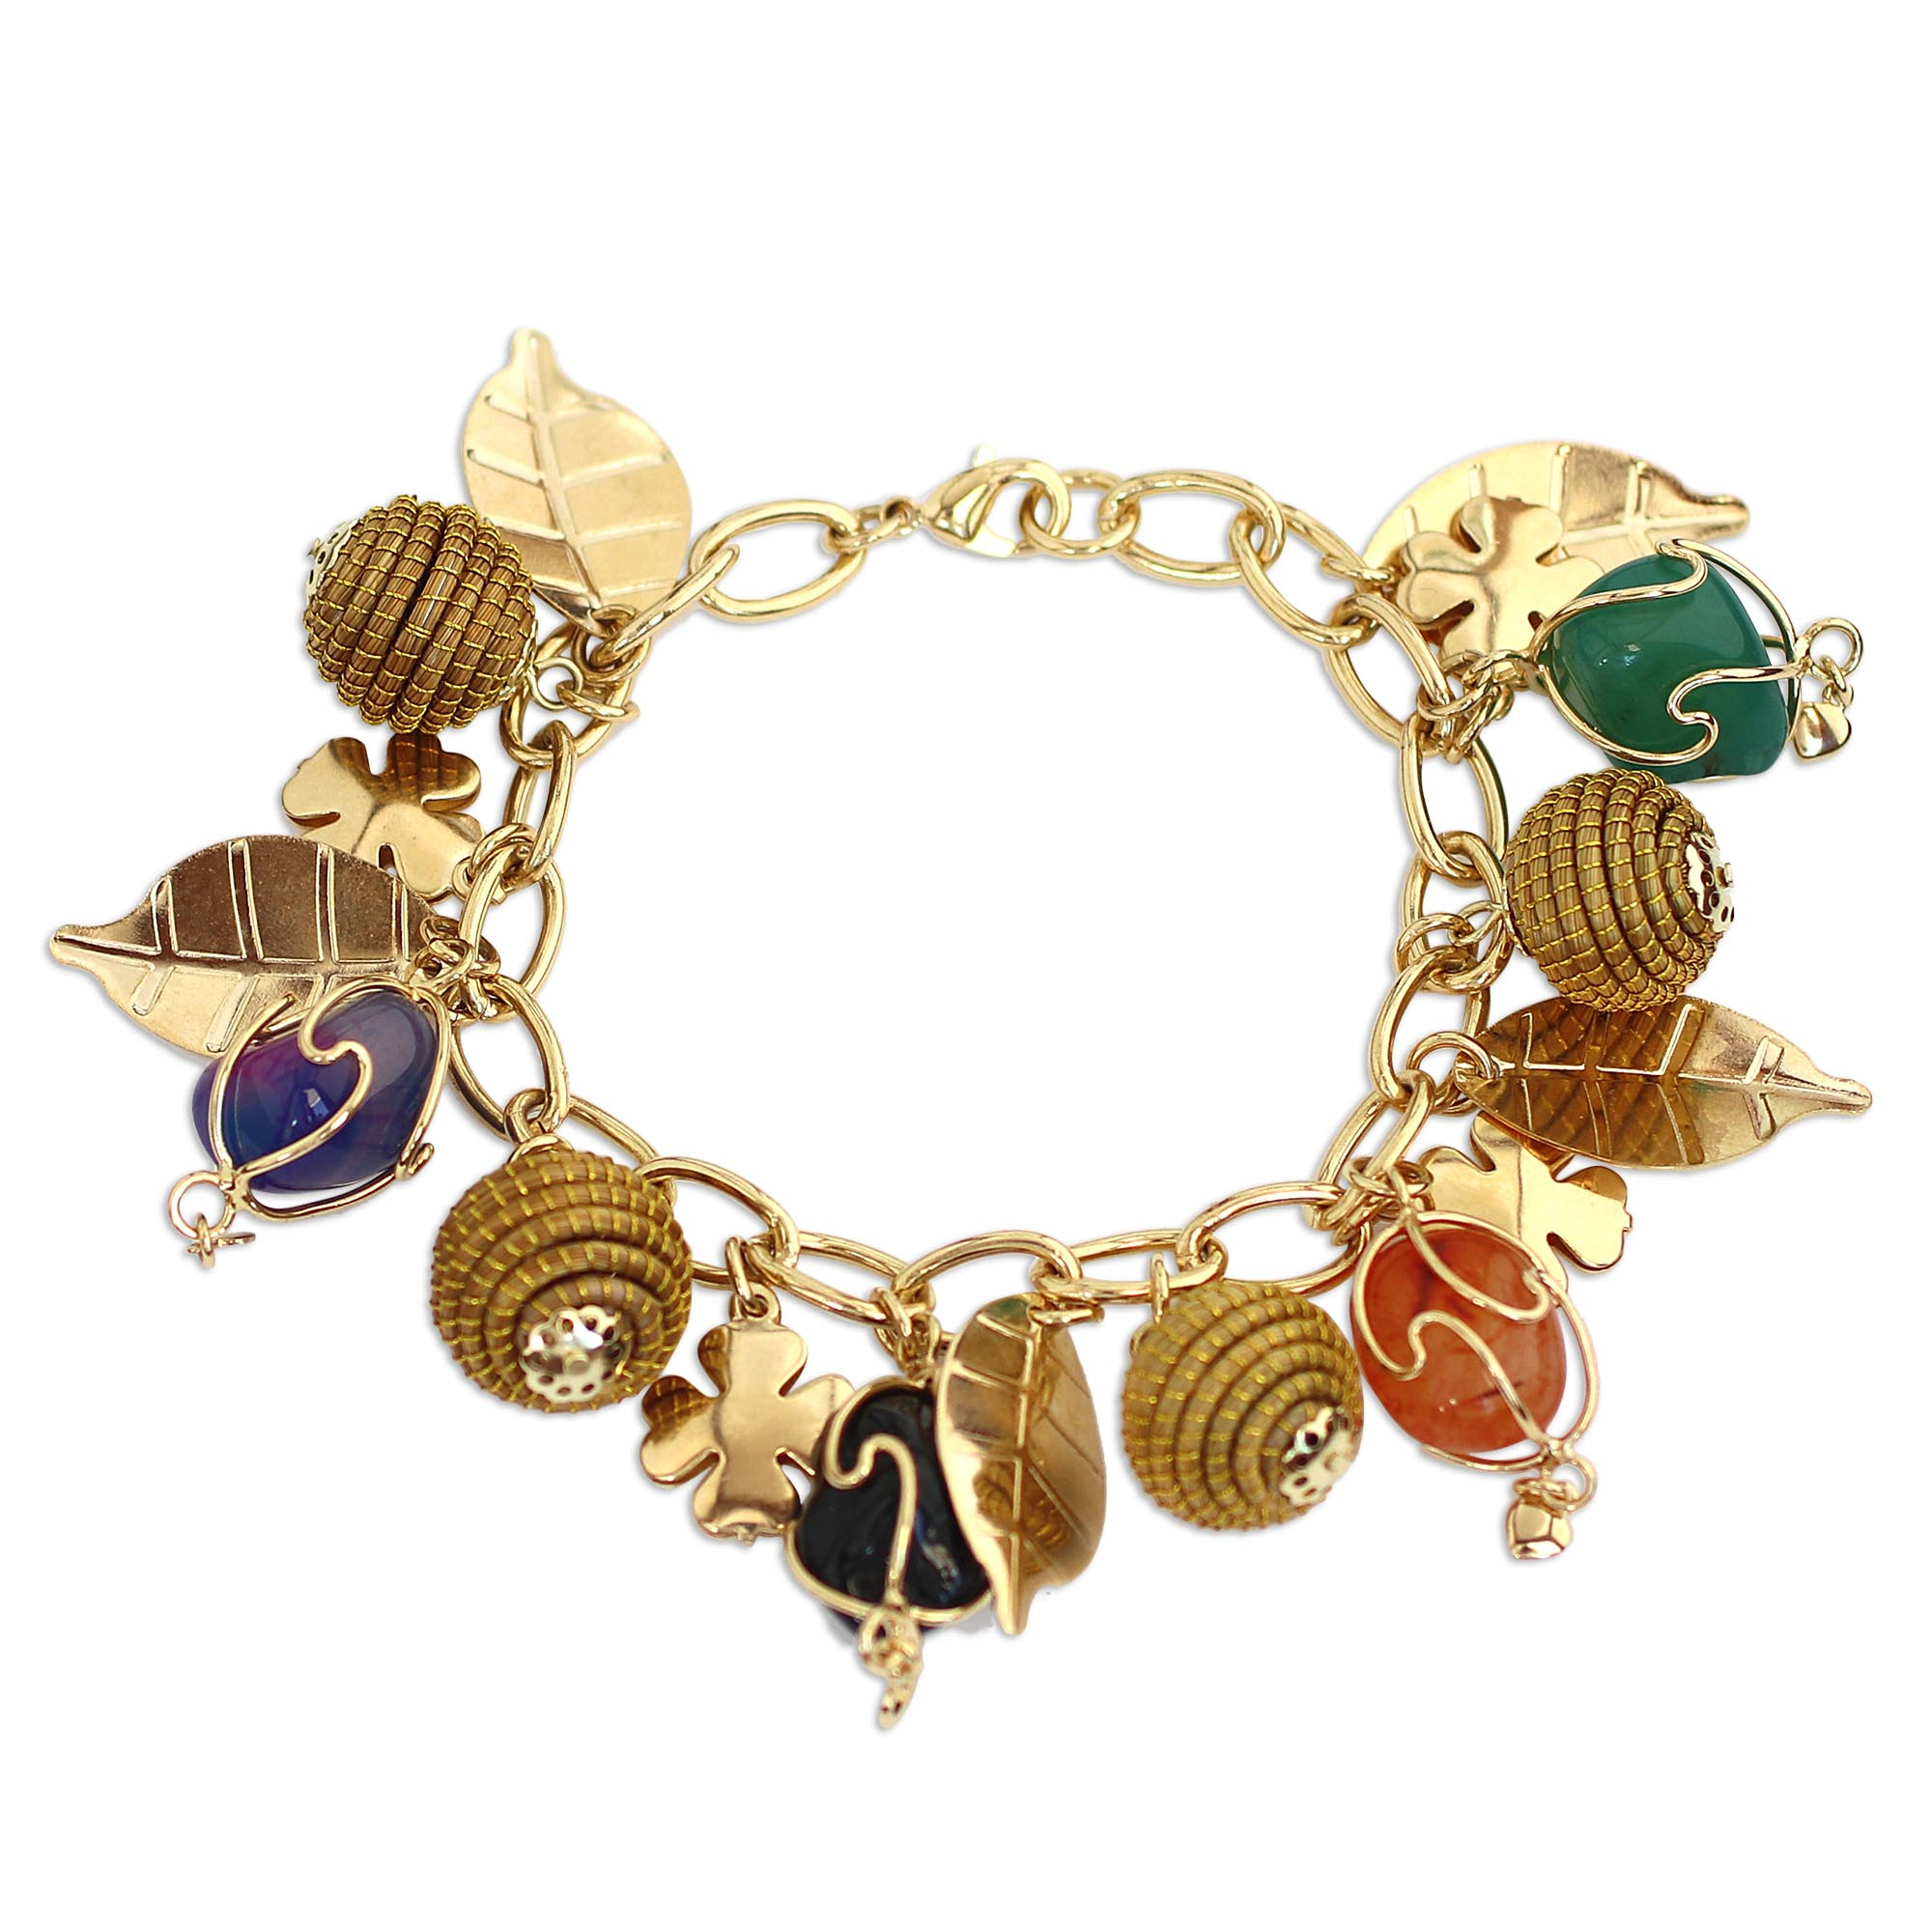 Inherited Chain Charm Bracelet | Mimosa Handcrafted Gold-Filled